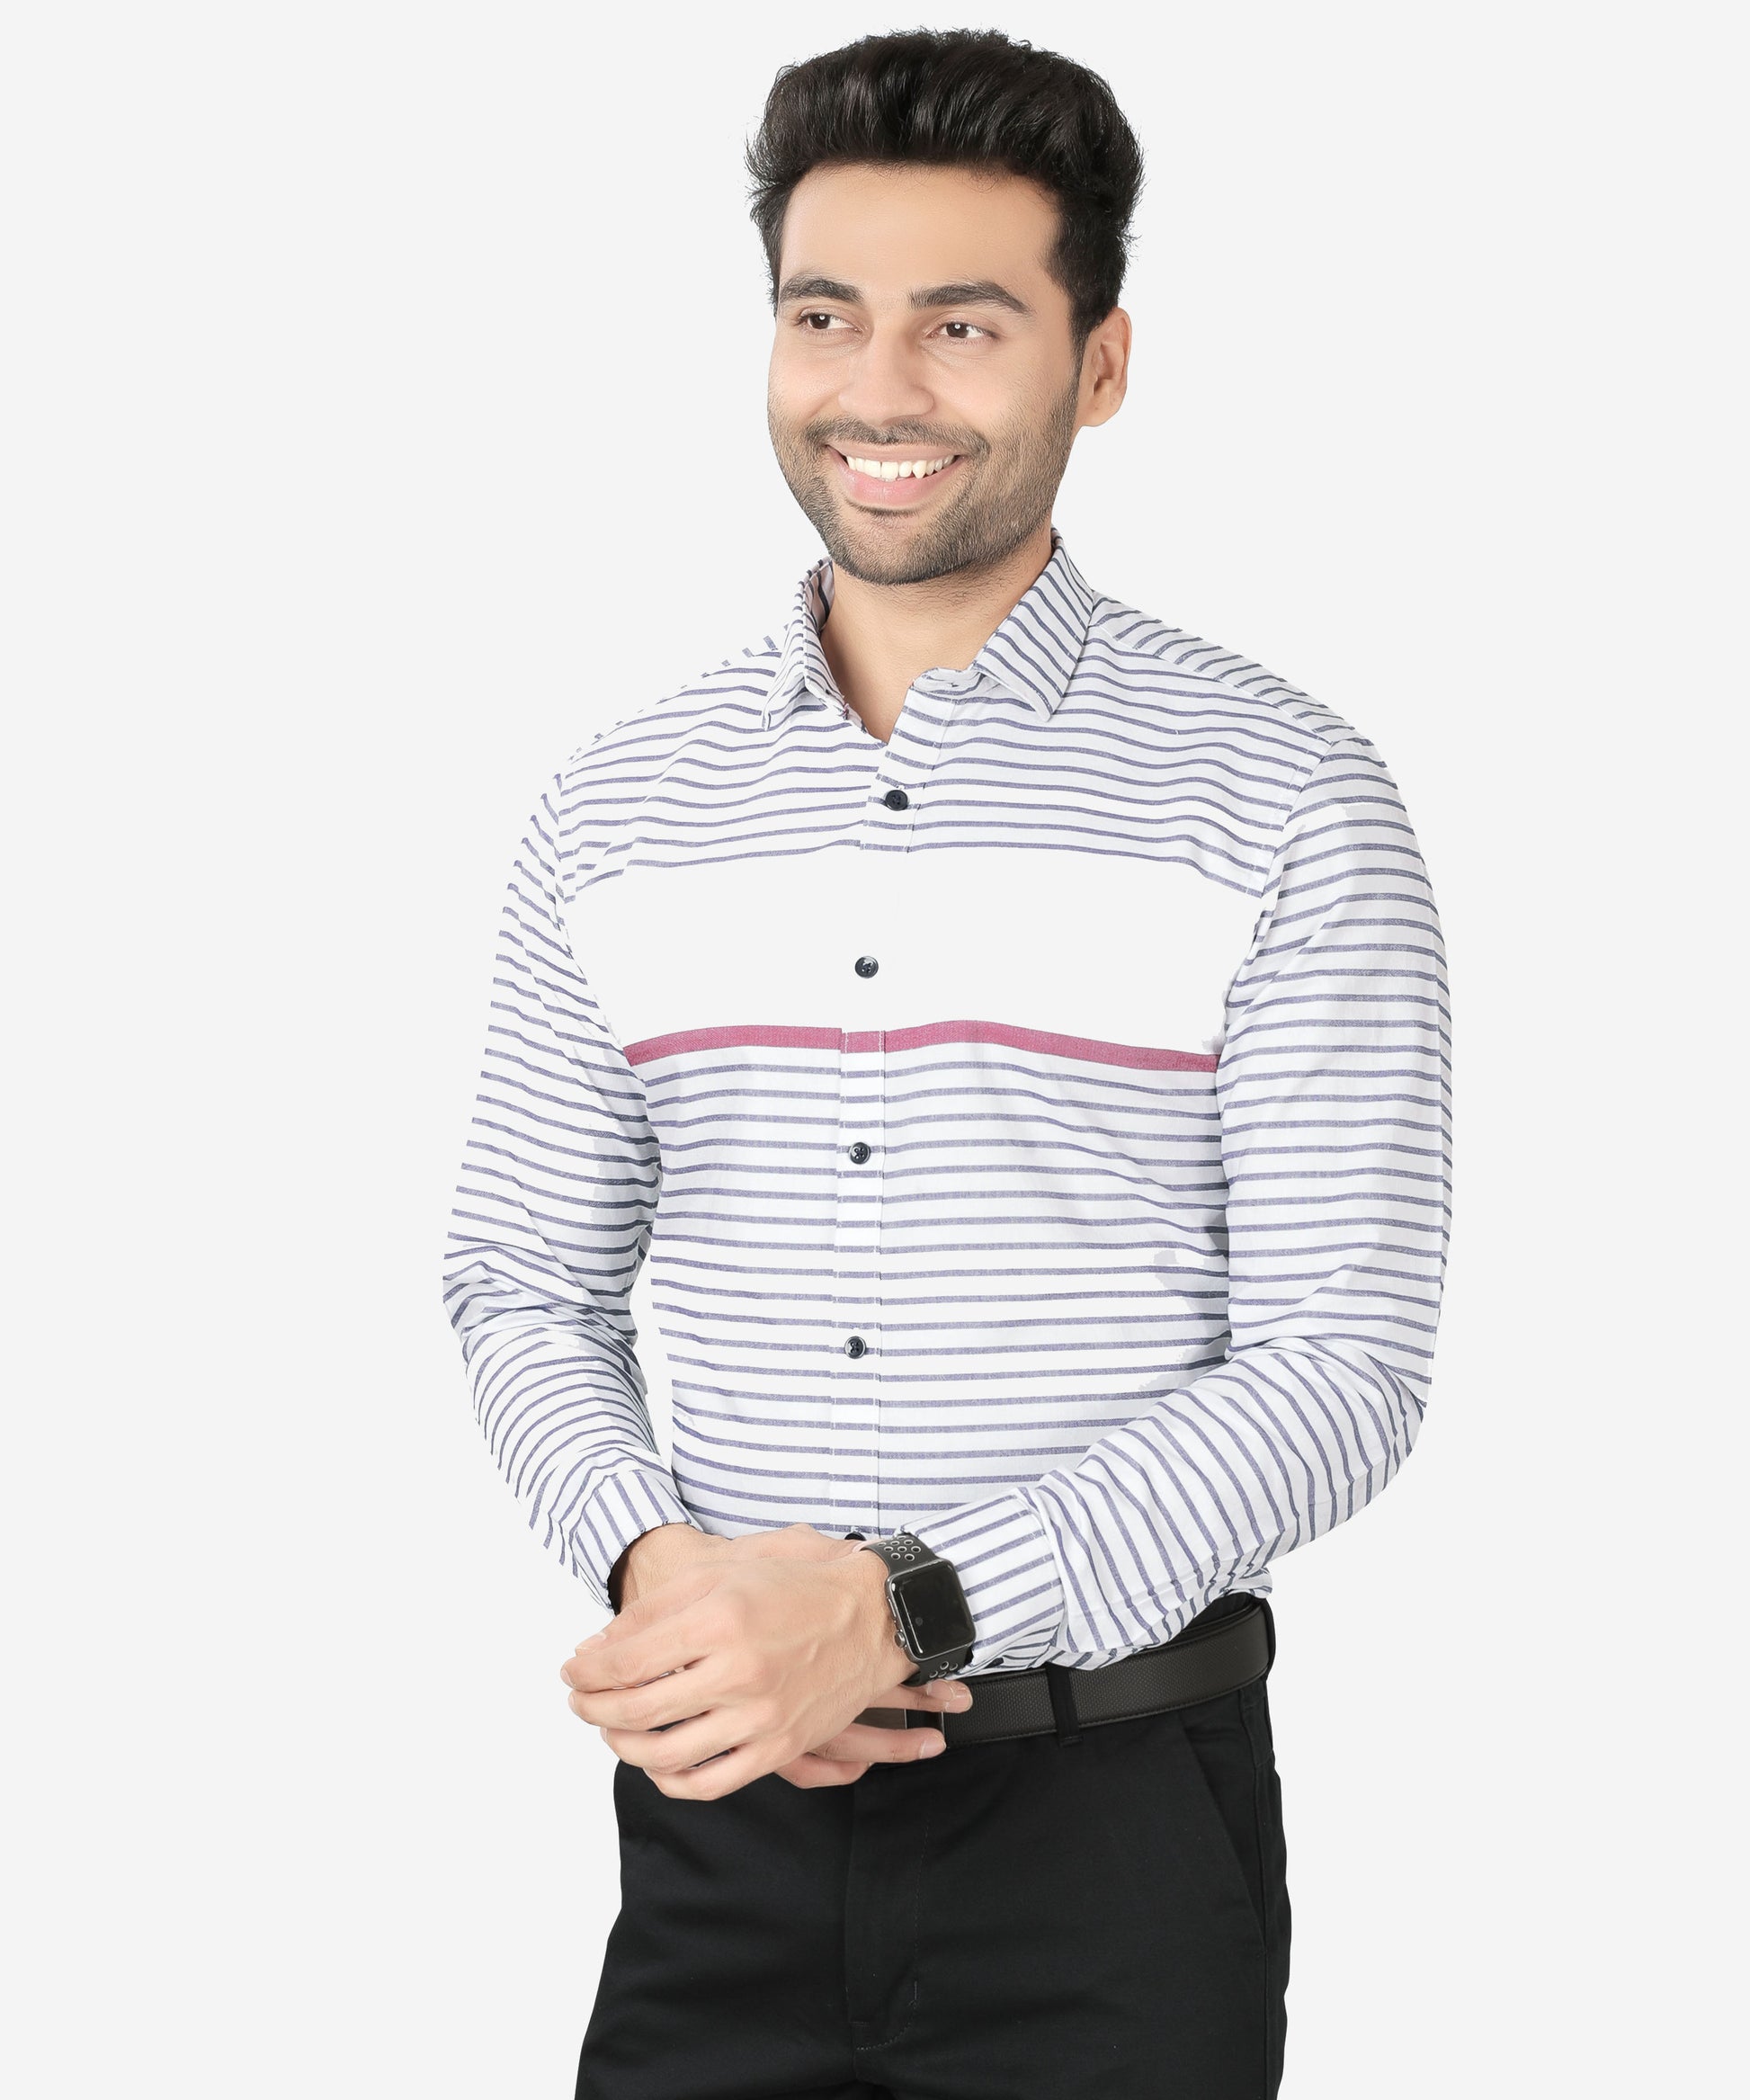 5thanfold Men's Formal Pure Cotton Full Sleeve Striped White Slim Fit Shirt